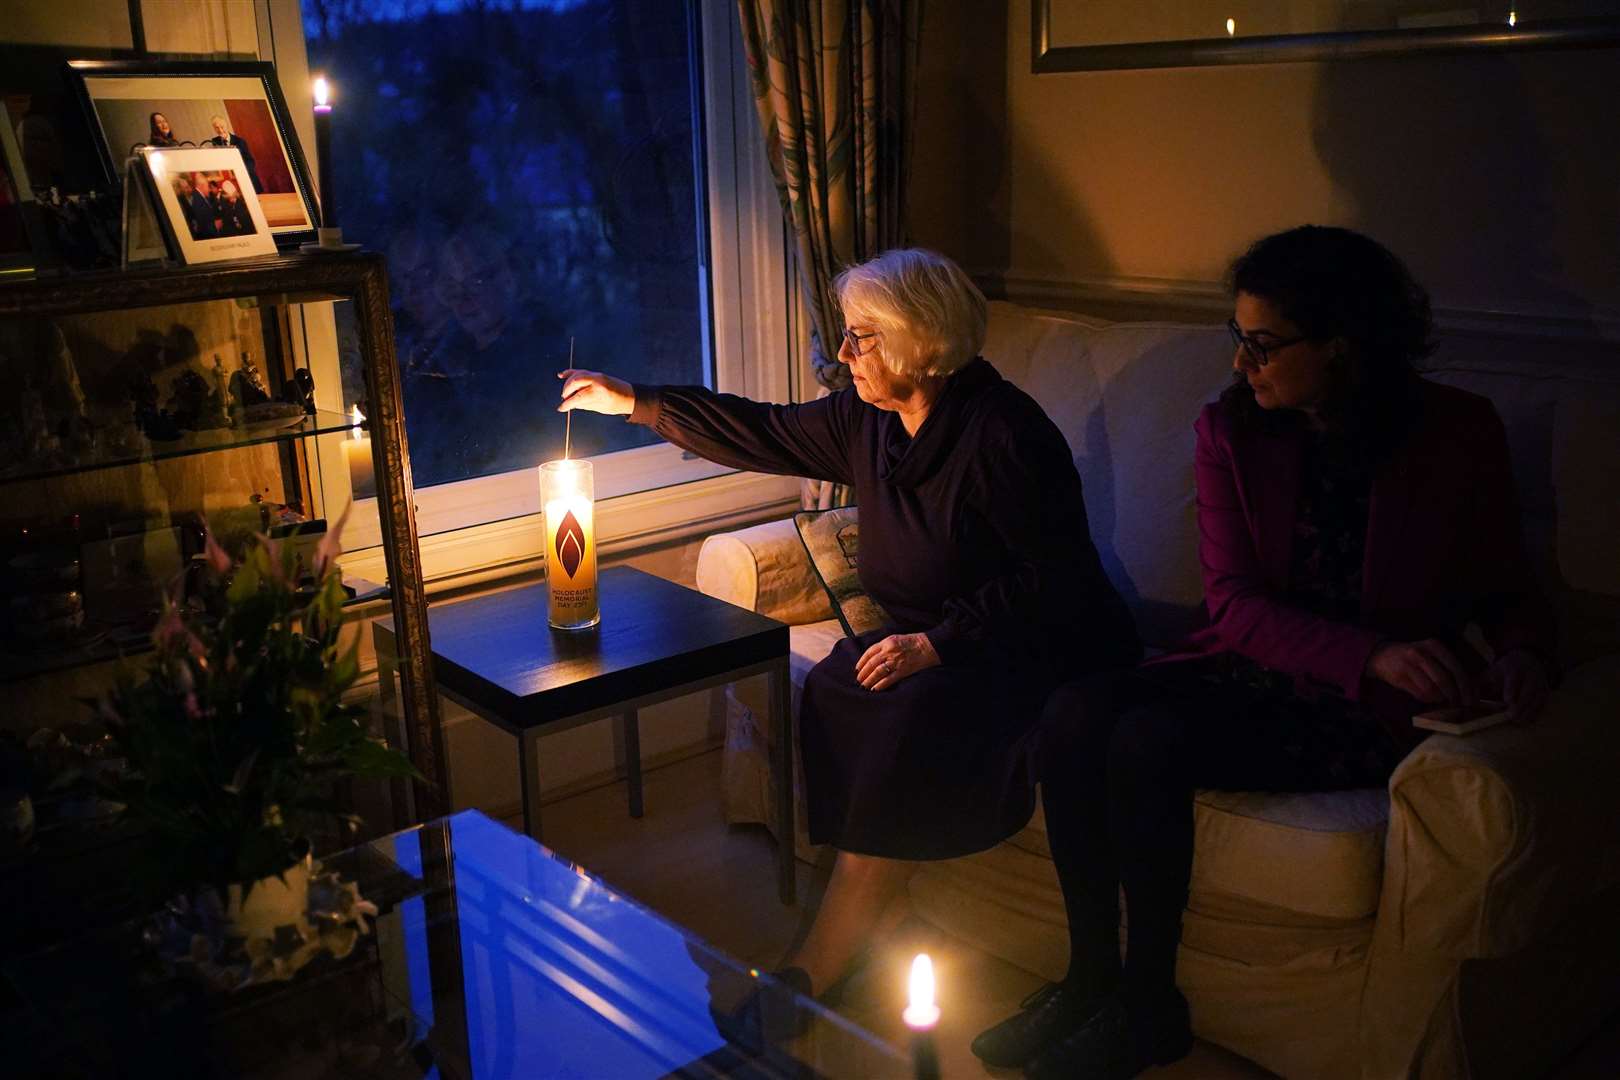 Holocaust survivor Joan Salter lights a memorial candle at her home in north London (Yui Mok/PA)